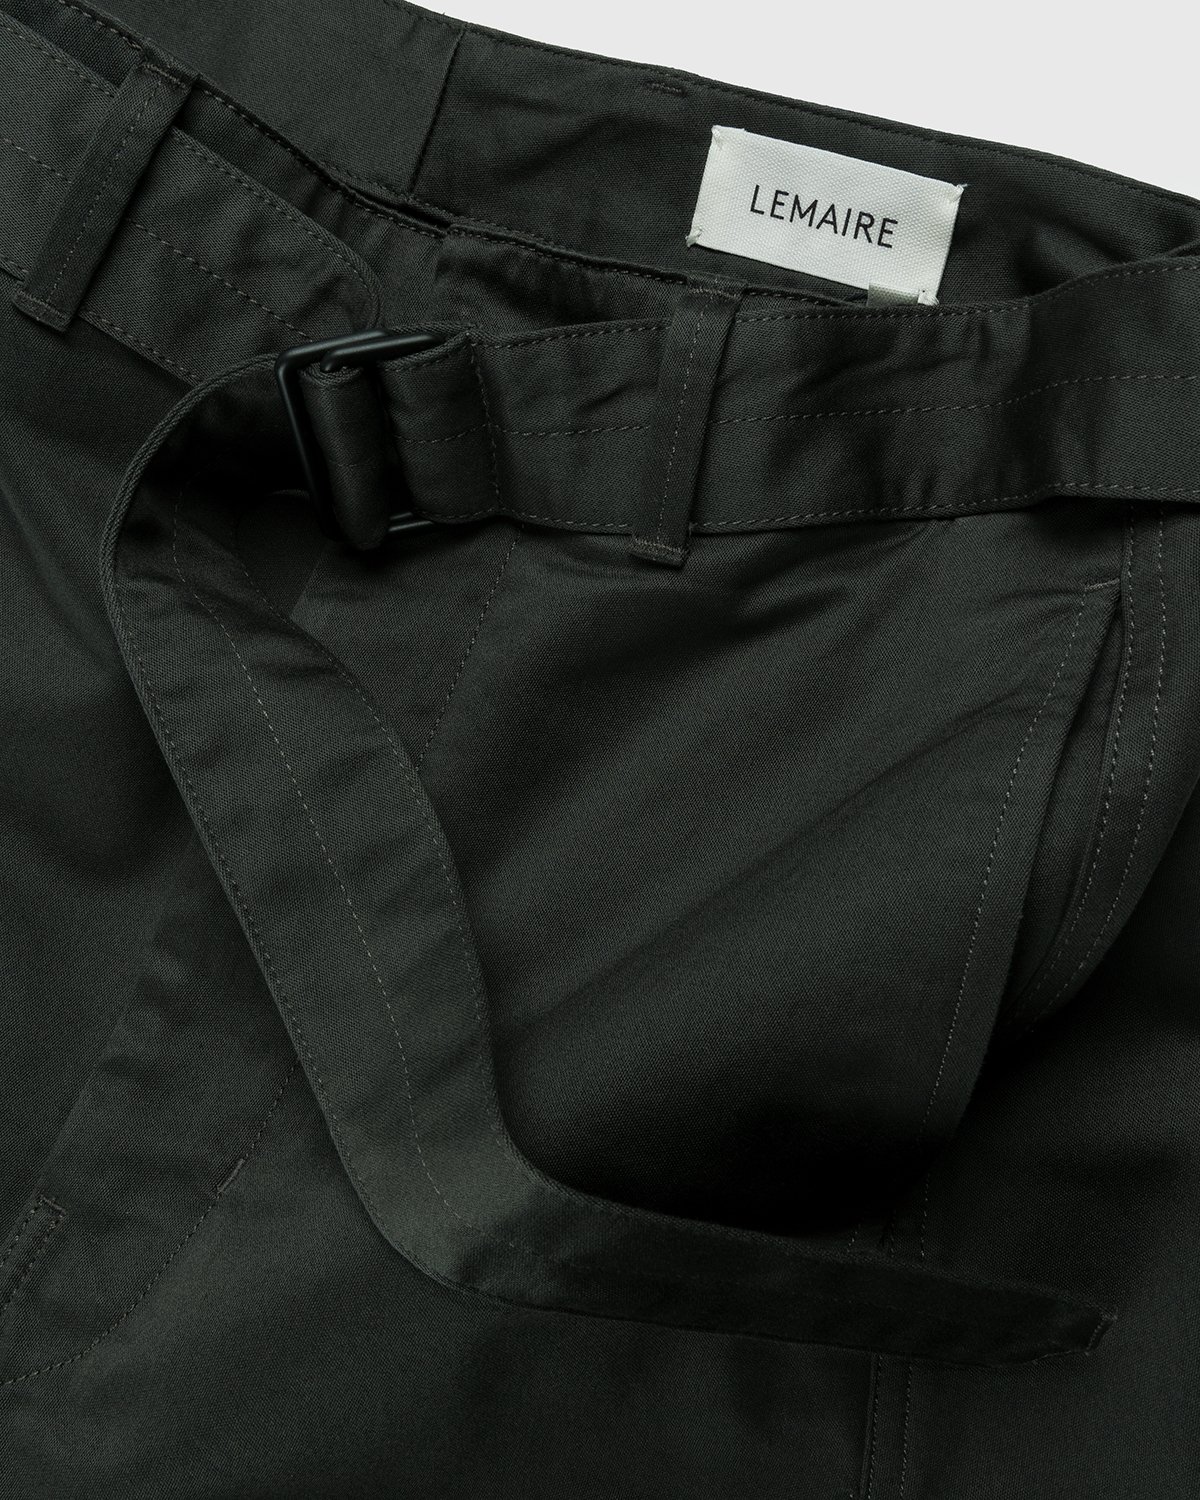 Lemaire - Twisted Belted Pants Dark Slate Green - Clothing - Grey - Image 5